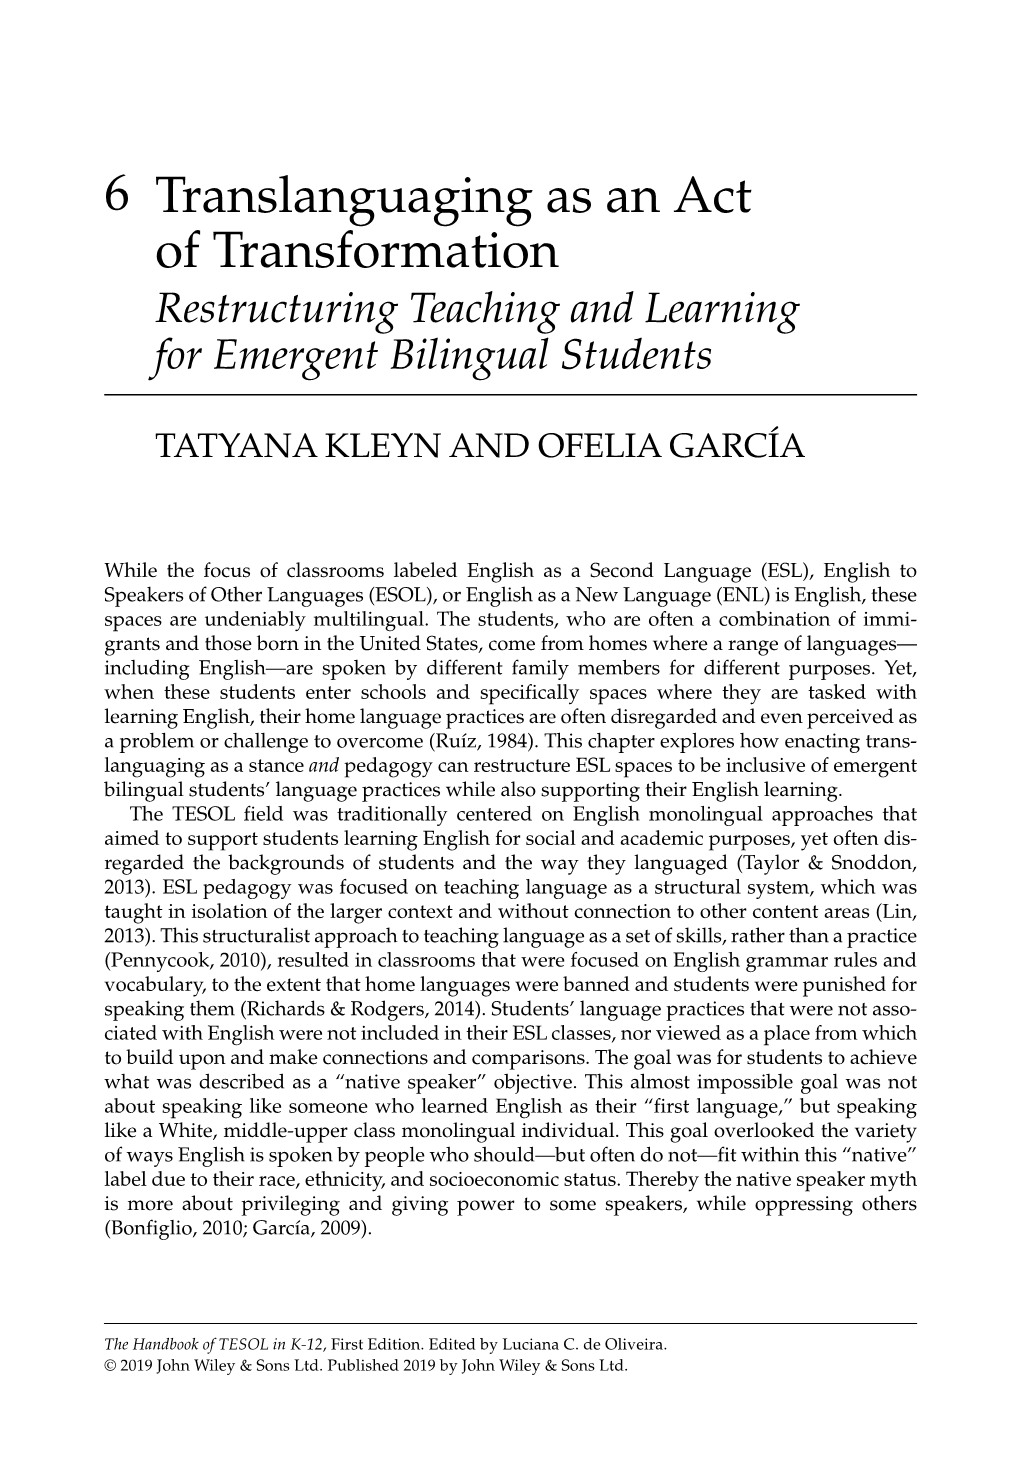 Translanguaging As an Act of Transformation Restructuring Teaching and Learning for Emergent Bilingual Students